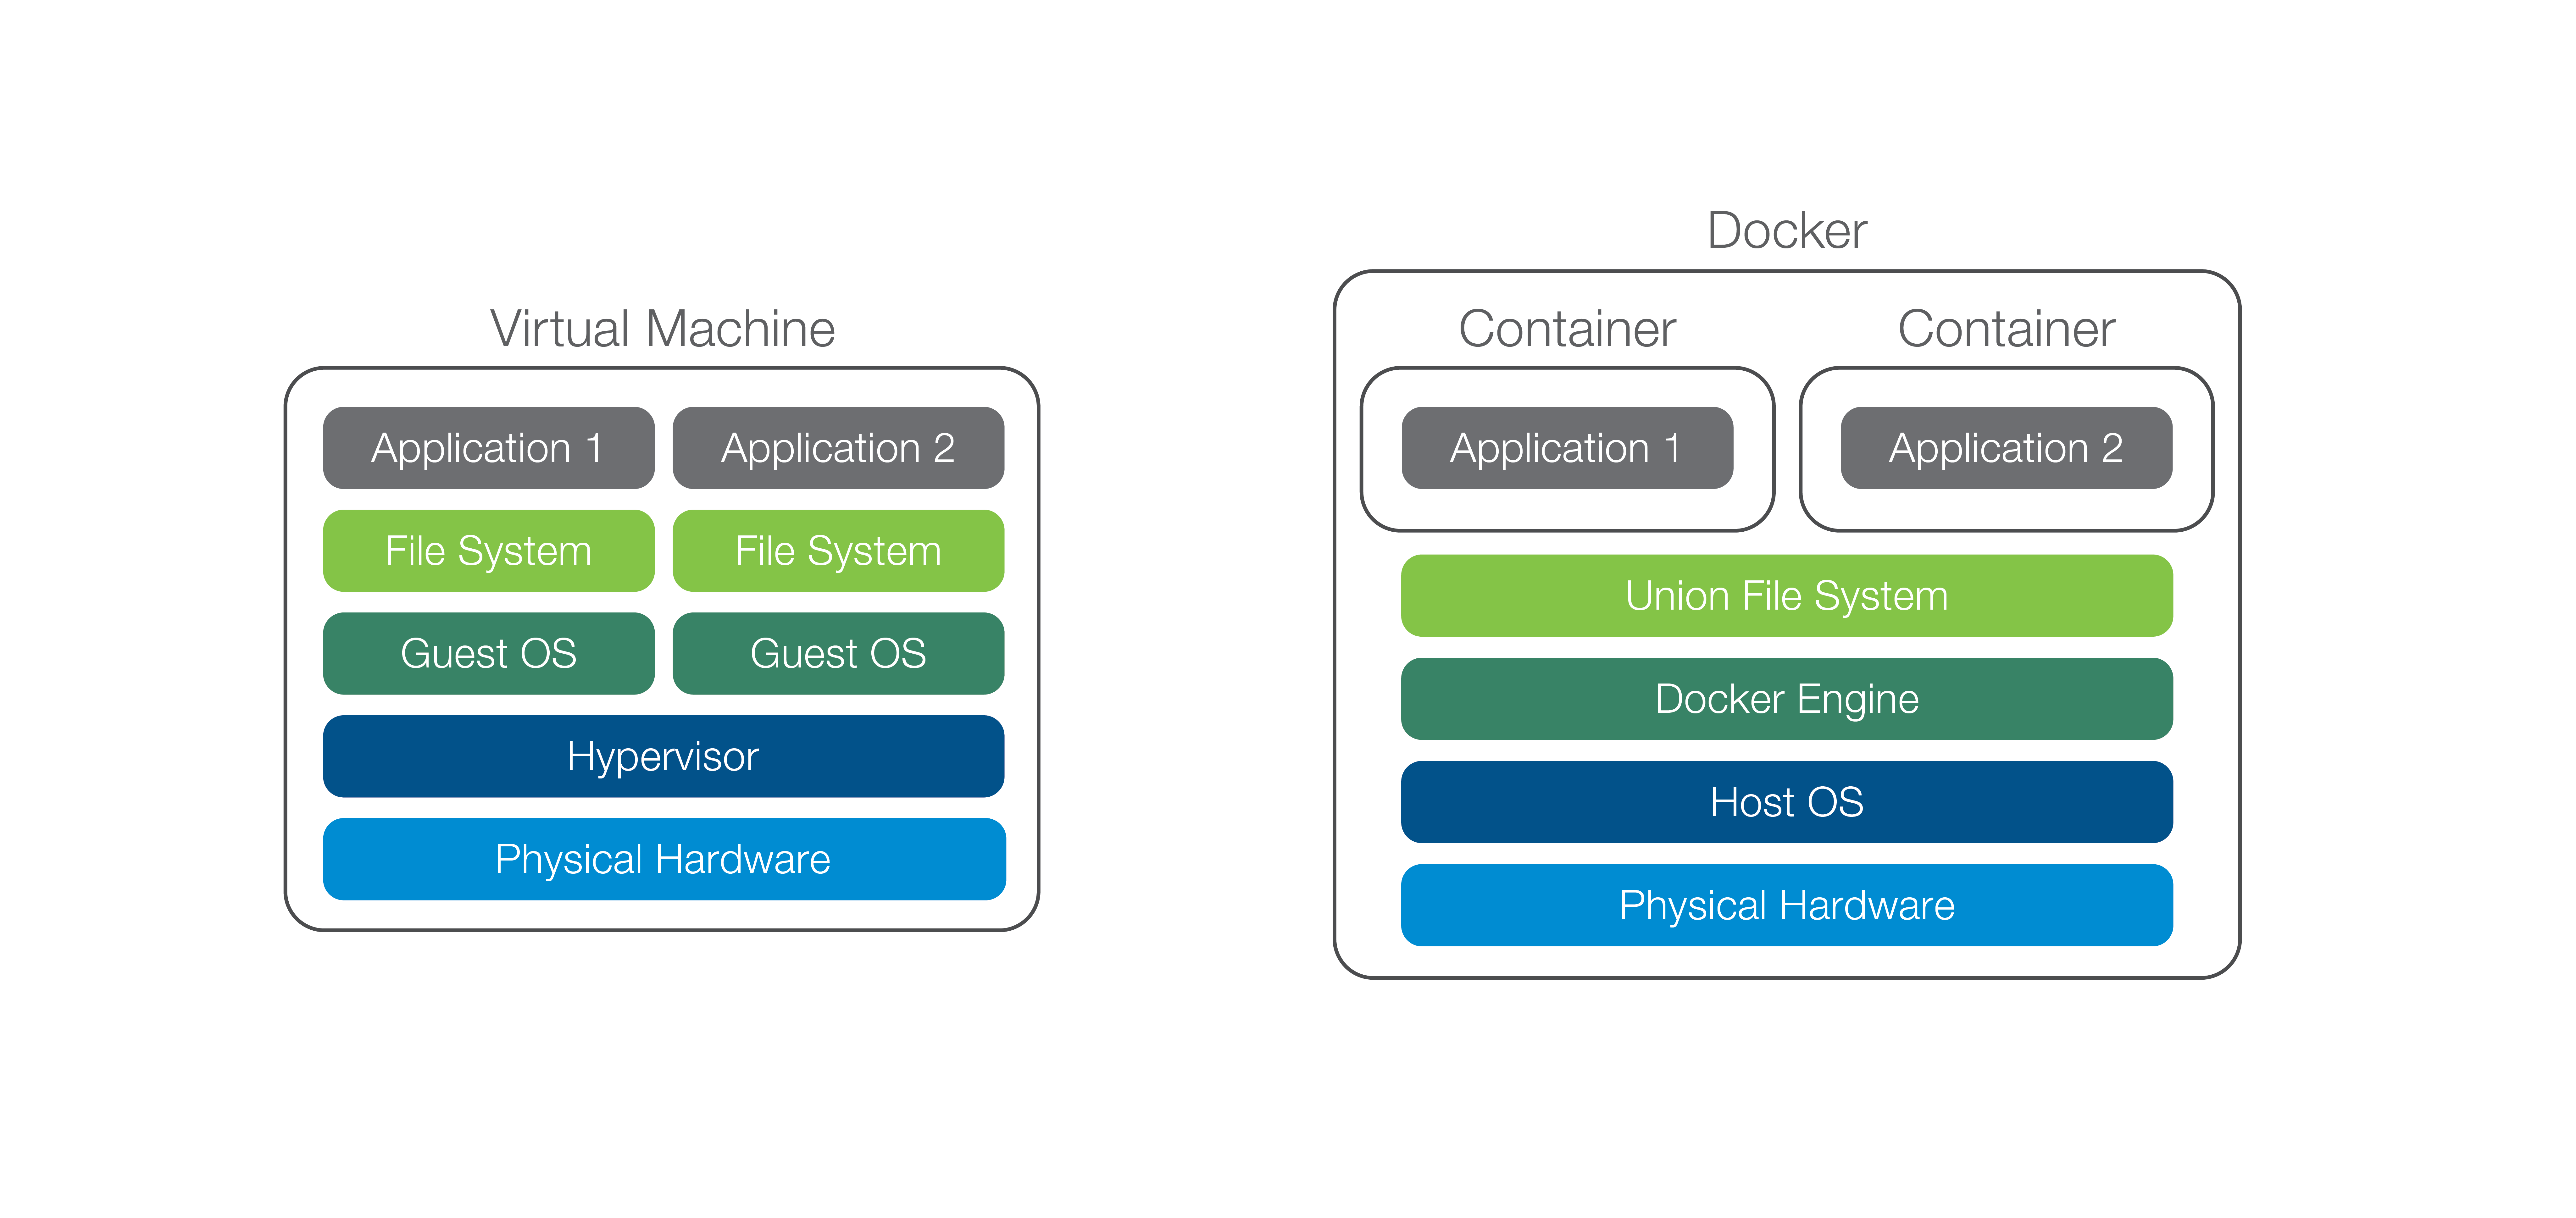 Comparison of virtual machines and Docker containers on a single host.